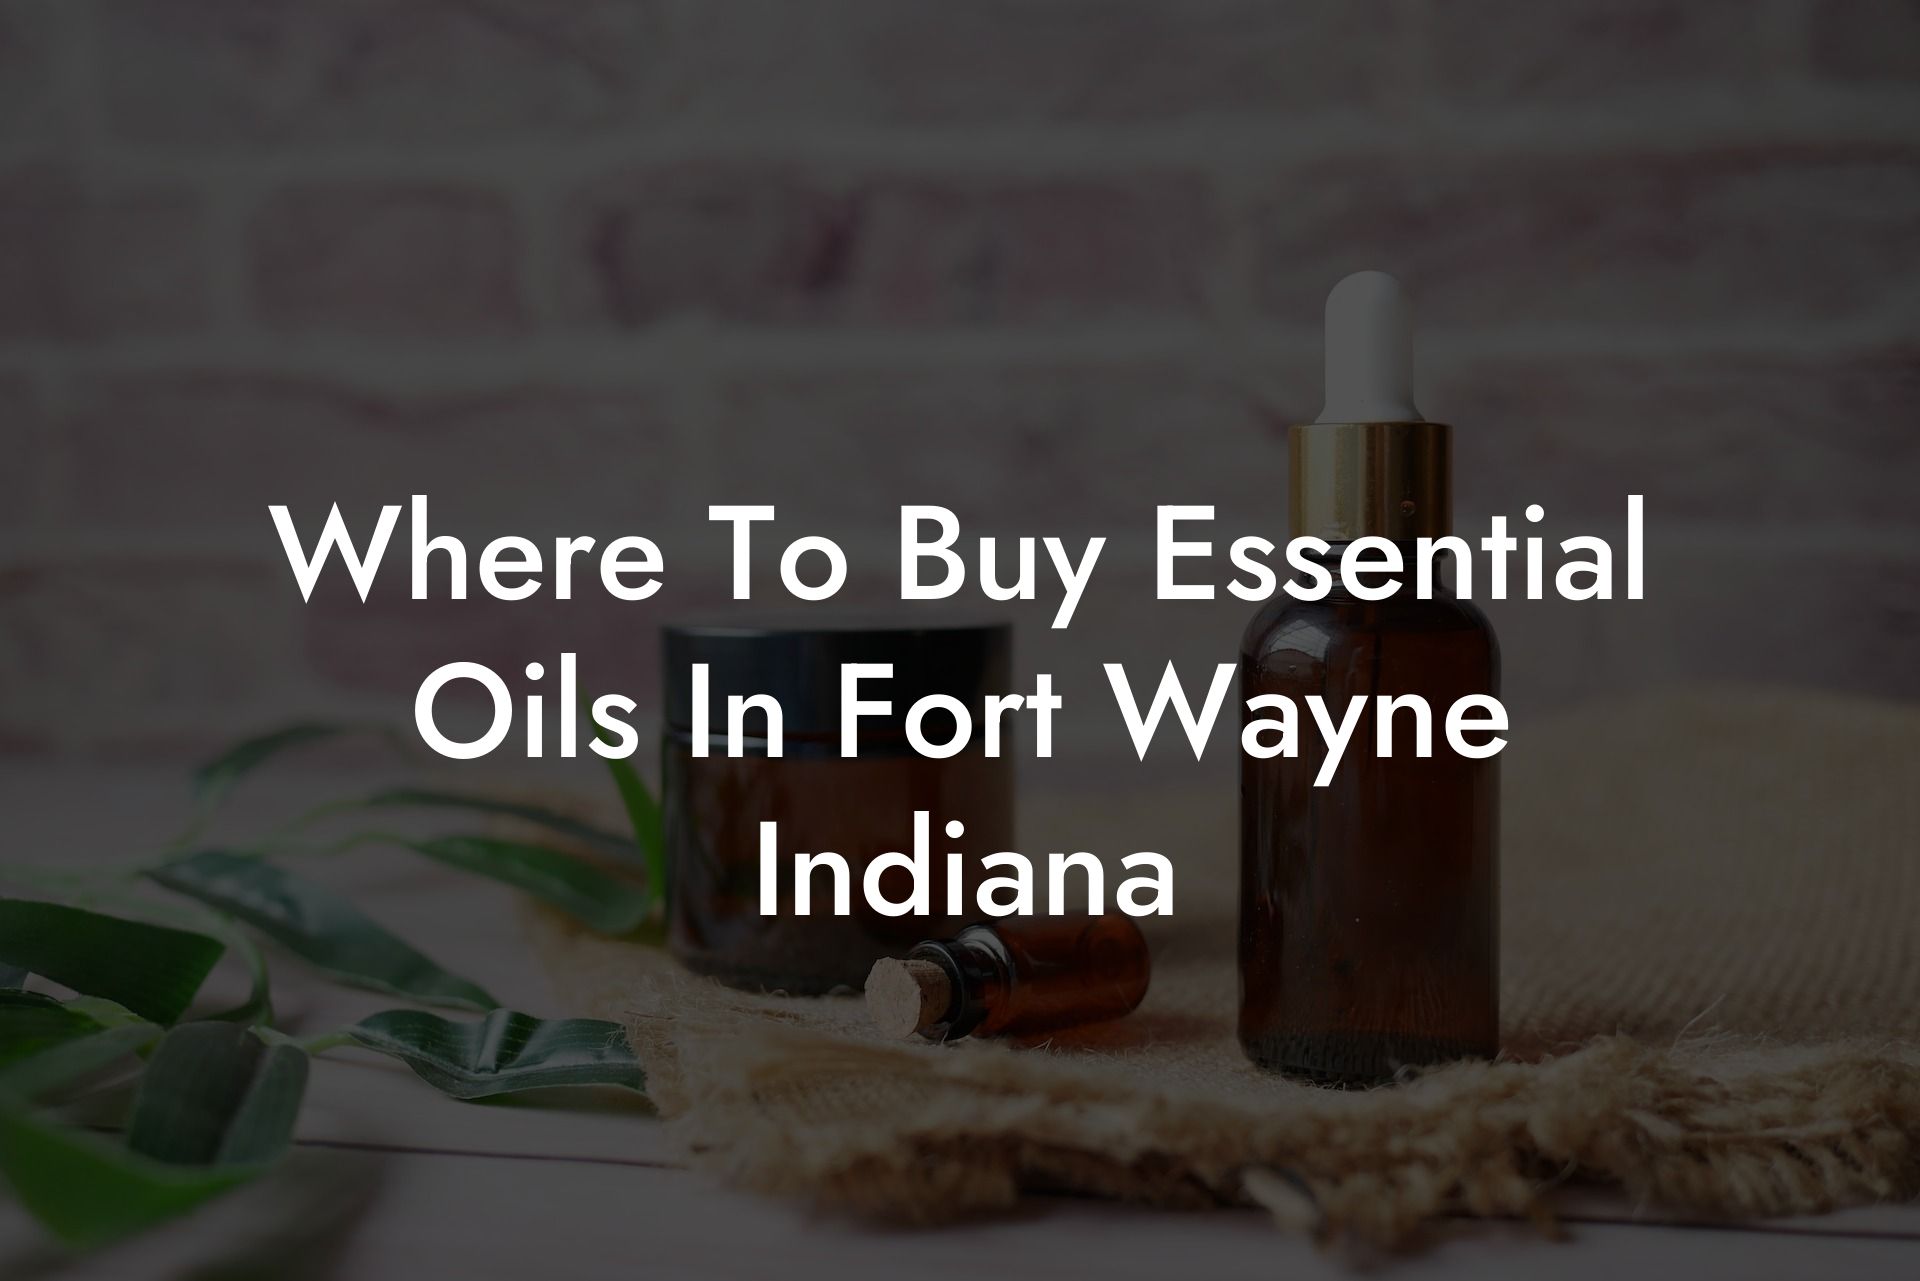 Where To Buy Essential Oils In Fort Wayne Indiana